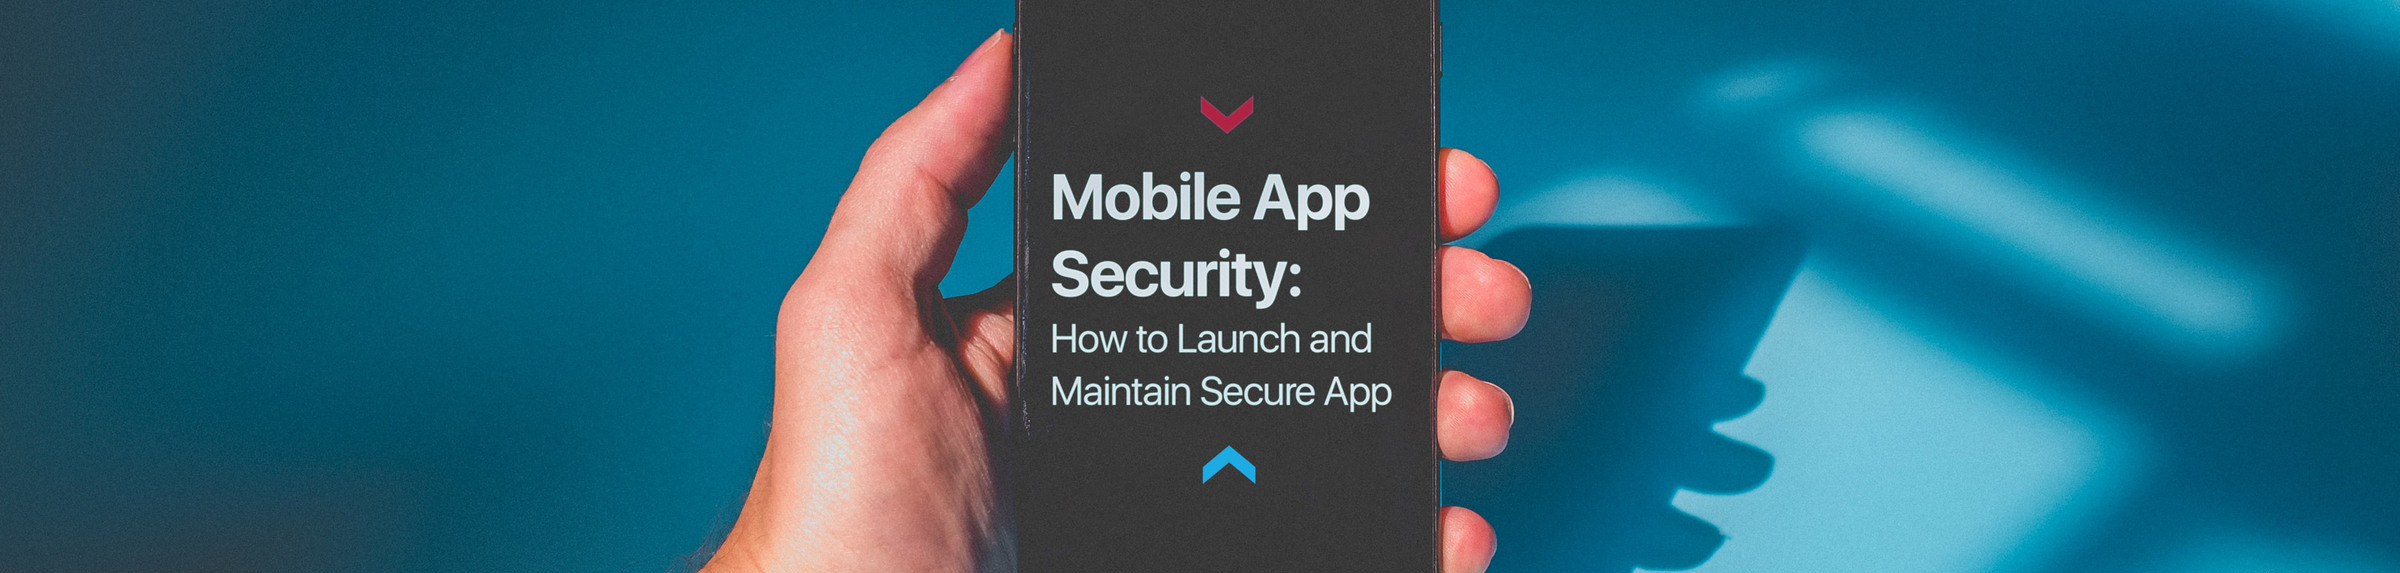 Diving deep into mobile app threats and overcoming them effectively